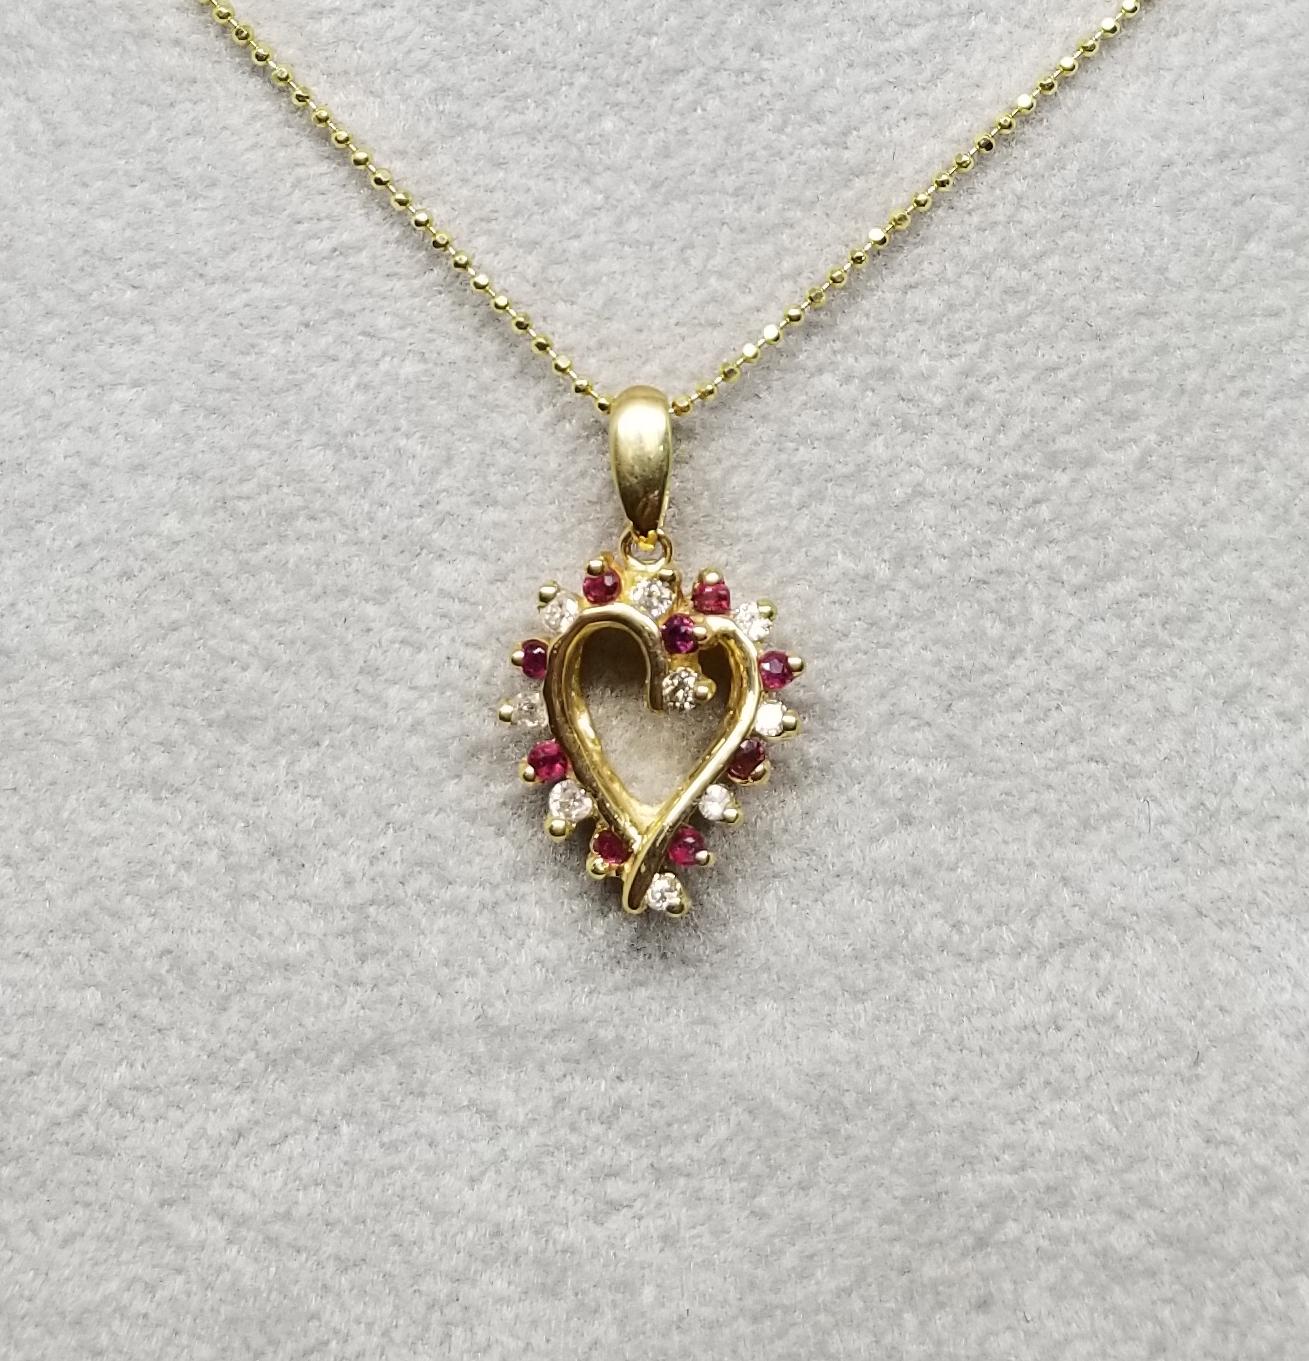 14k yellow gold ruby and diamond heart containing 9 rubies weighing .26pt. and 9 diamonds weighing .20pts. on a 16 inch chain.
